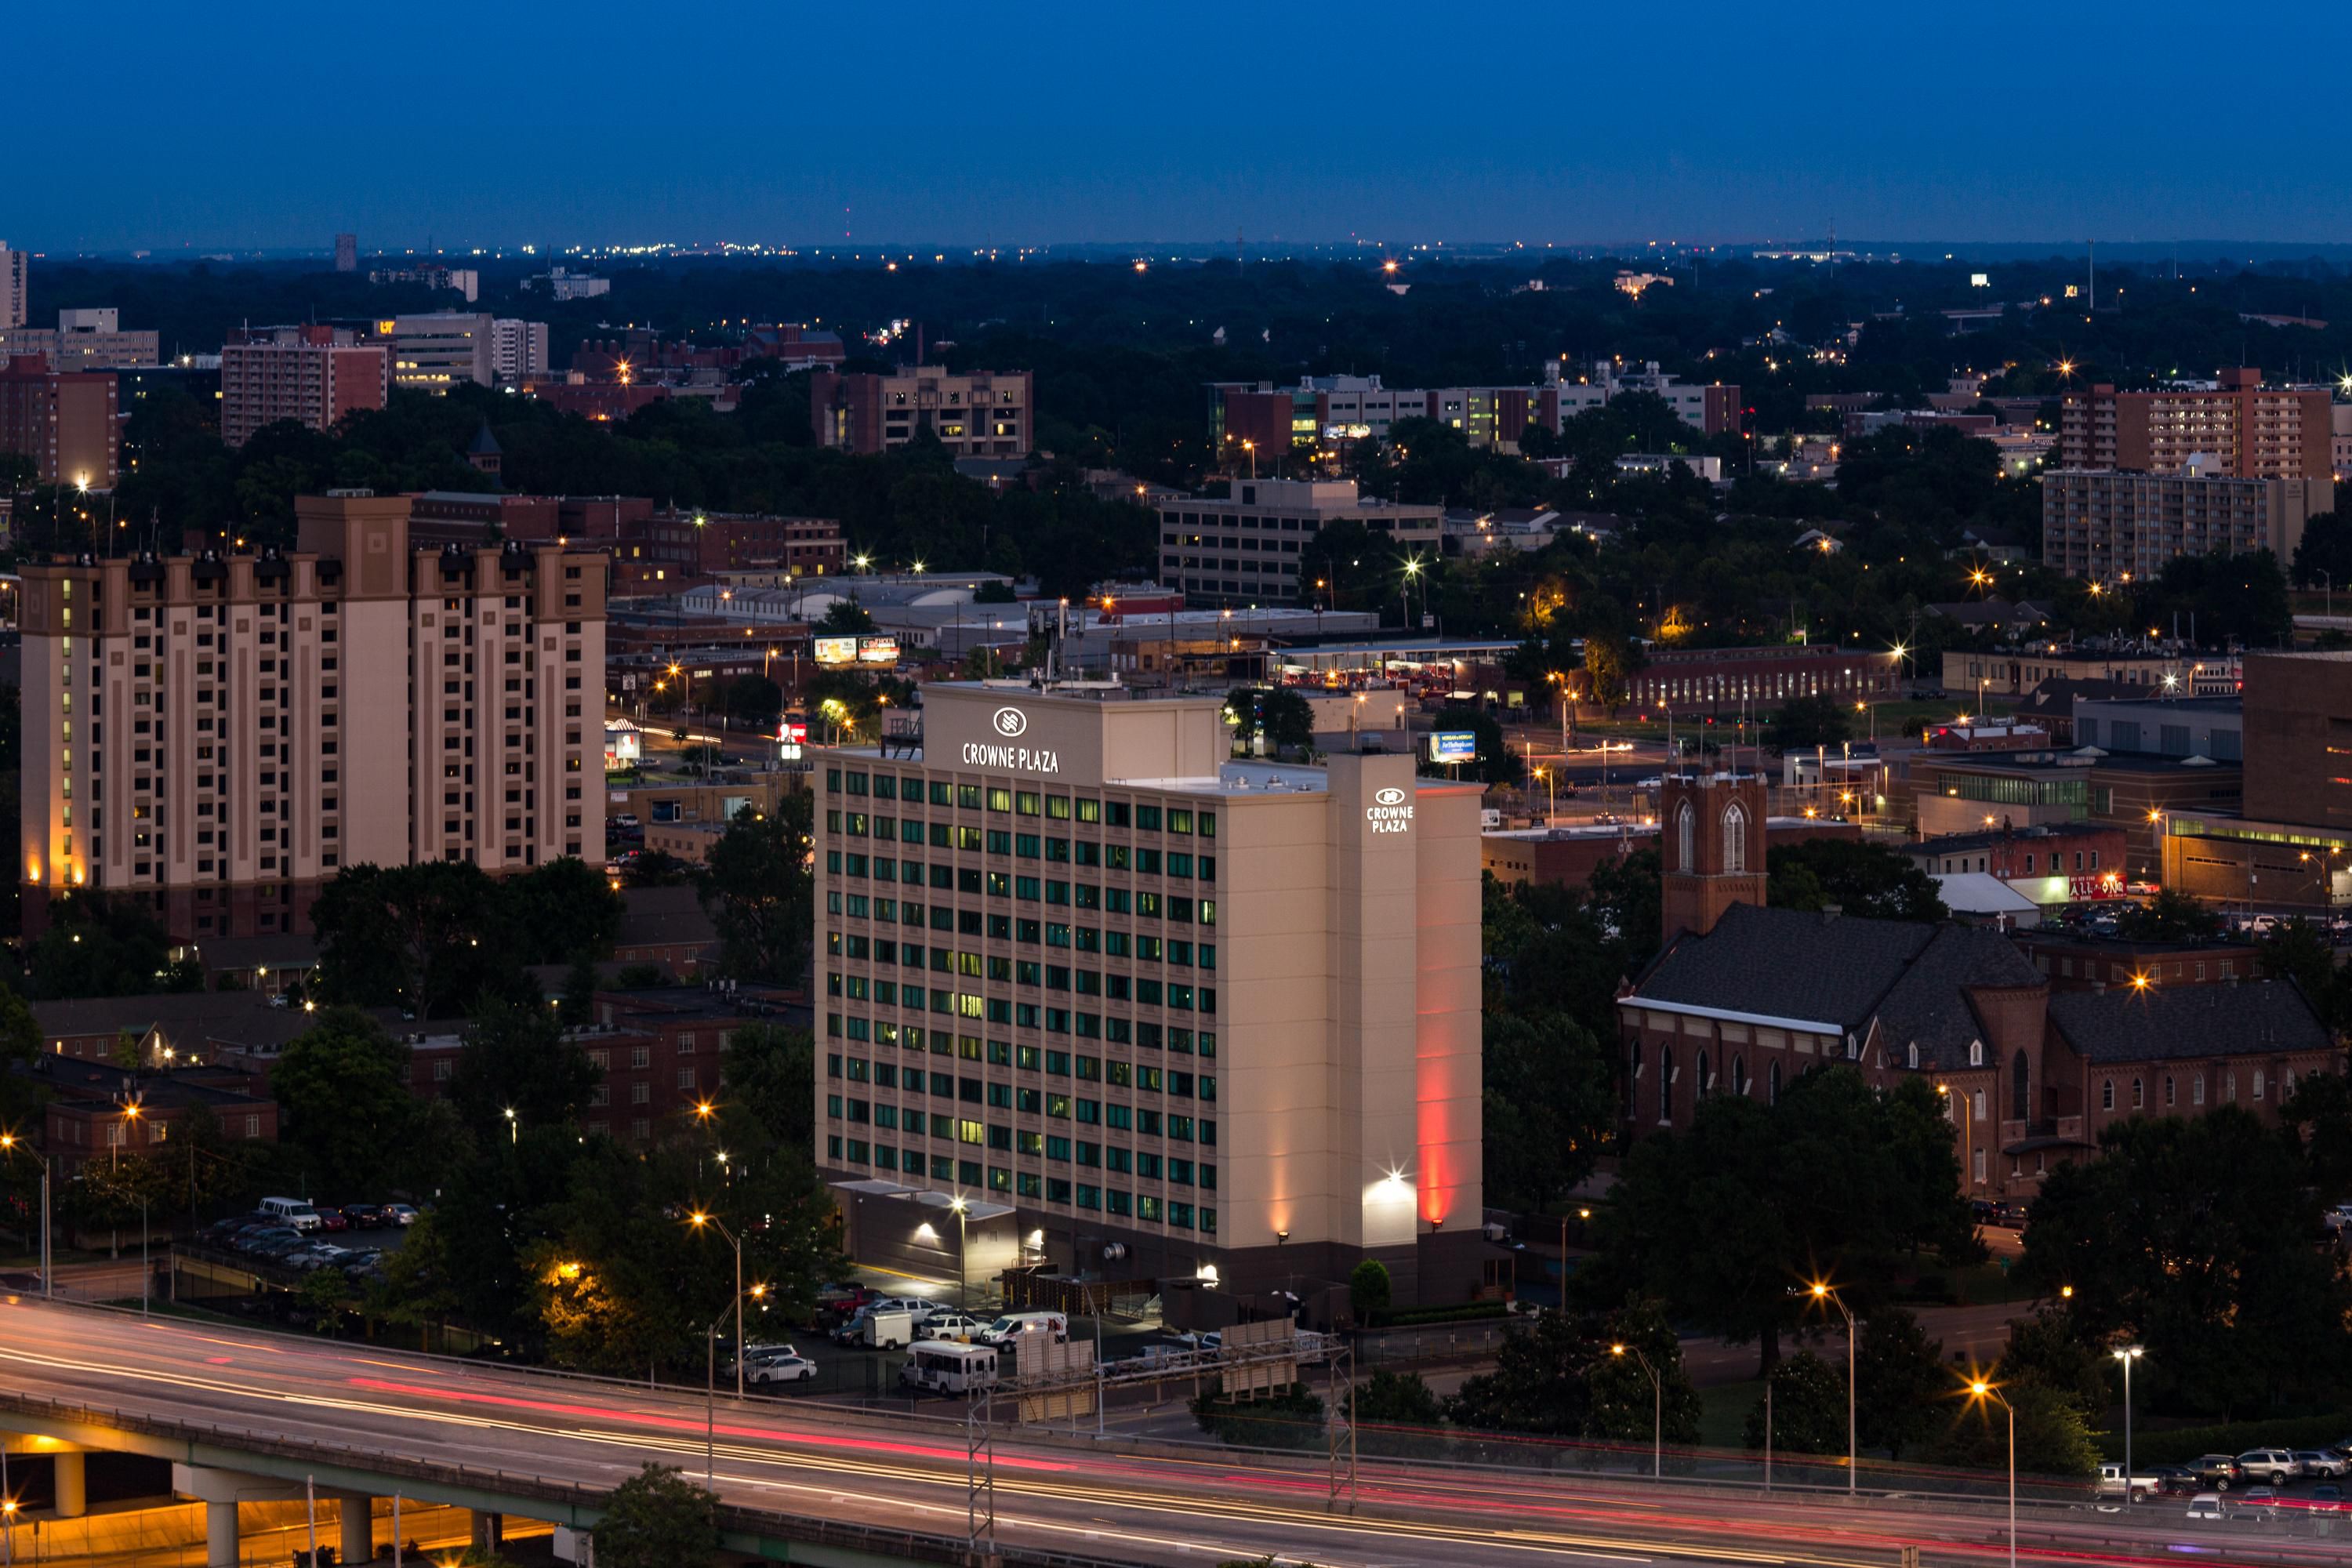 Enjoy views of downtown Memphis from our Crowne Plaza hotel.